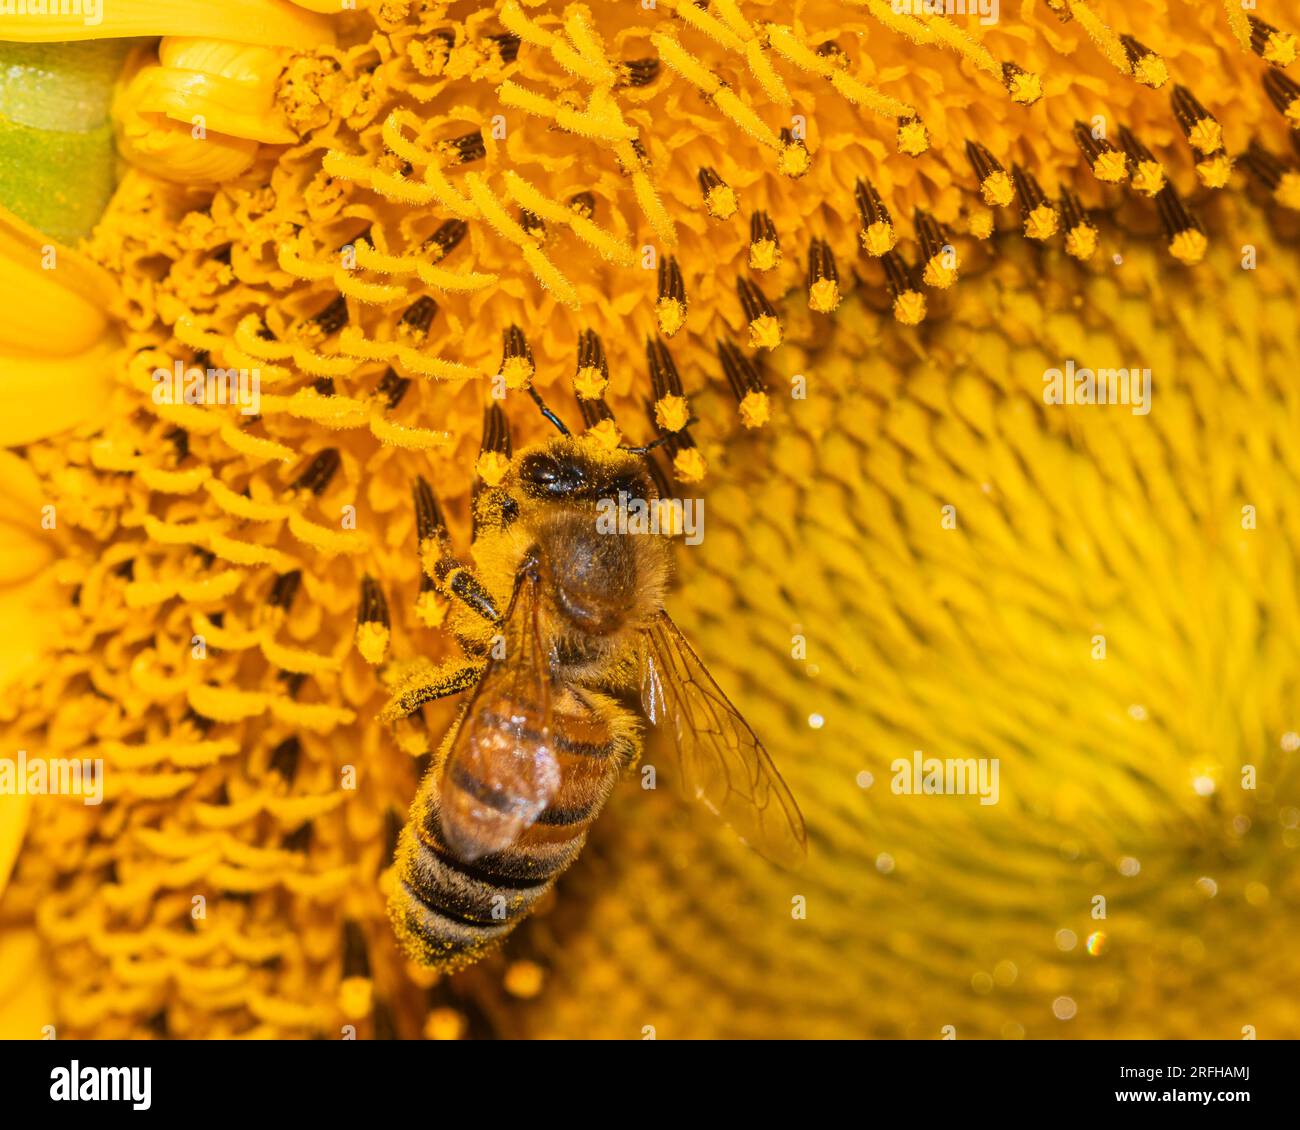 Nature's dance: bee gracefully foraging on a vibrant sunflower's golden treasure Stock Photo